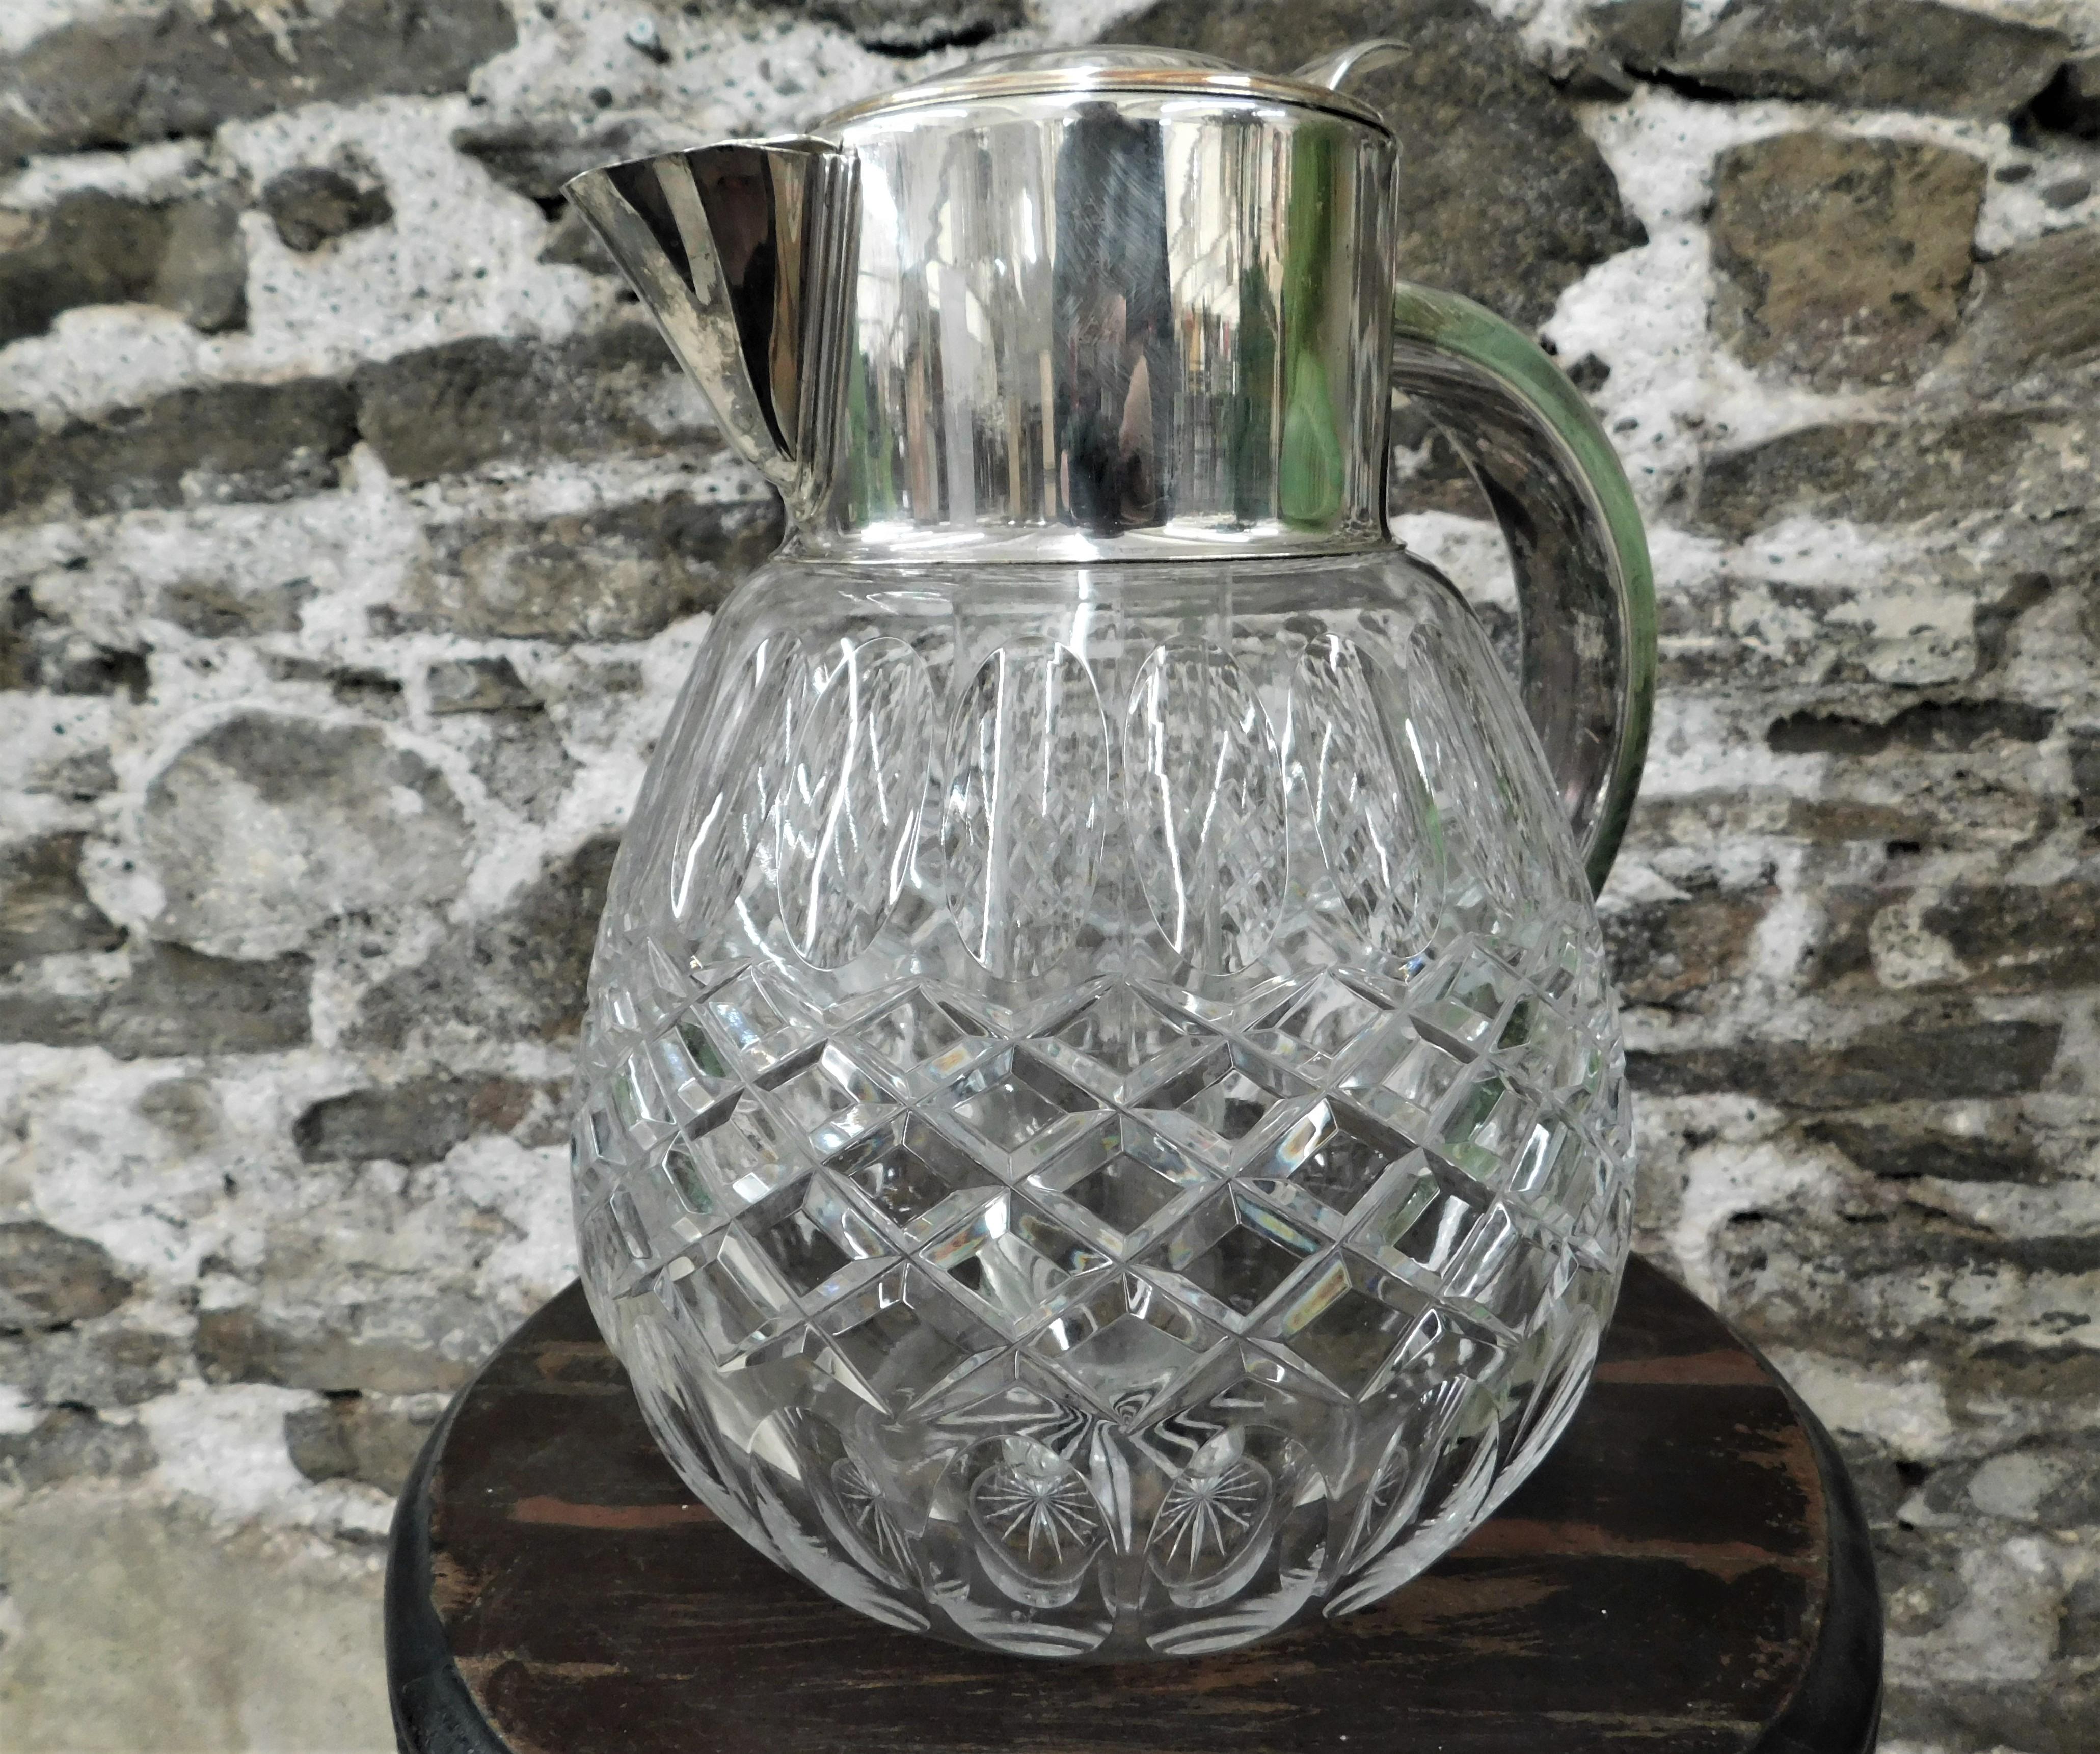 Beautiful 1940's silver plated hand cut crystal glass juice/punch/liquor pitcher/jug/decanter with ice cube chiller. Center portion screws into lid for ice placement and has cork inserted in lid, cools your beverage without diluting it.